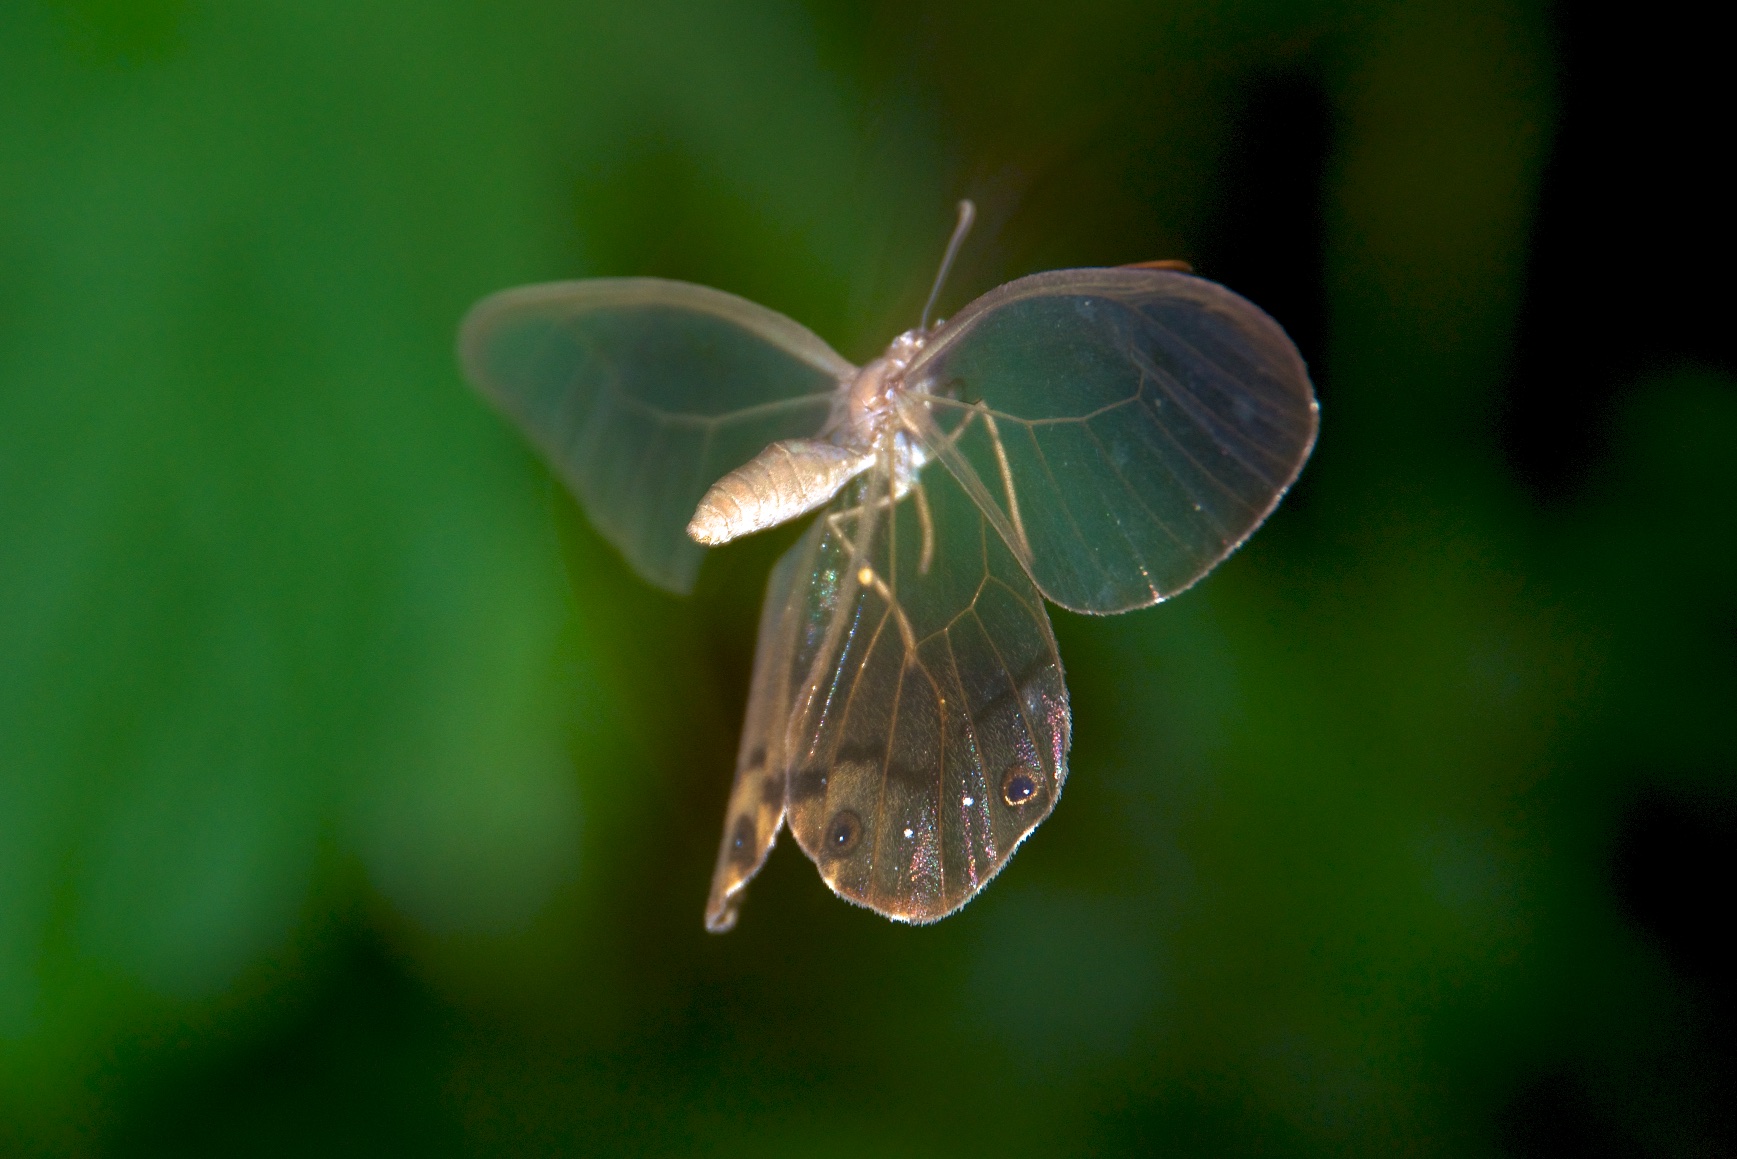  Transparent butterfly flying, Tambopata Research Centre, Peru 